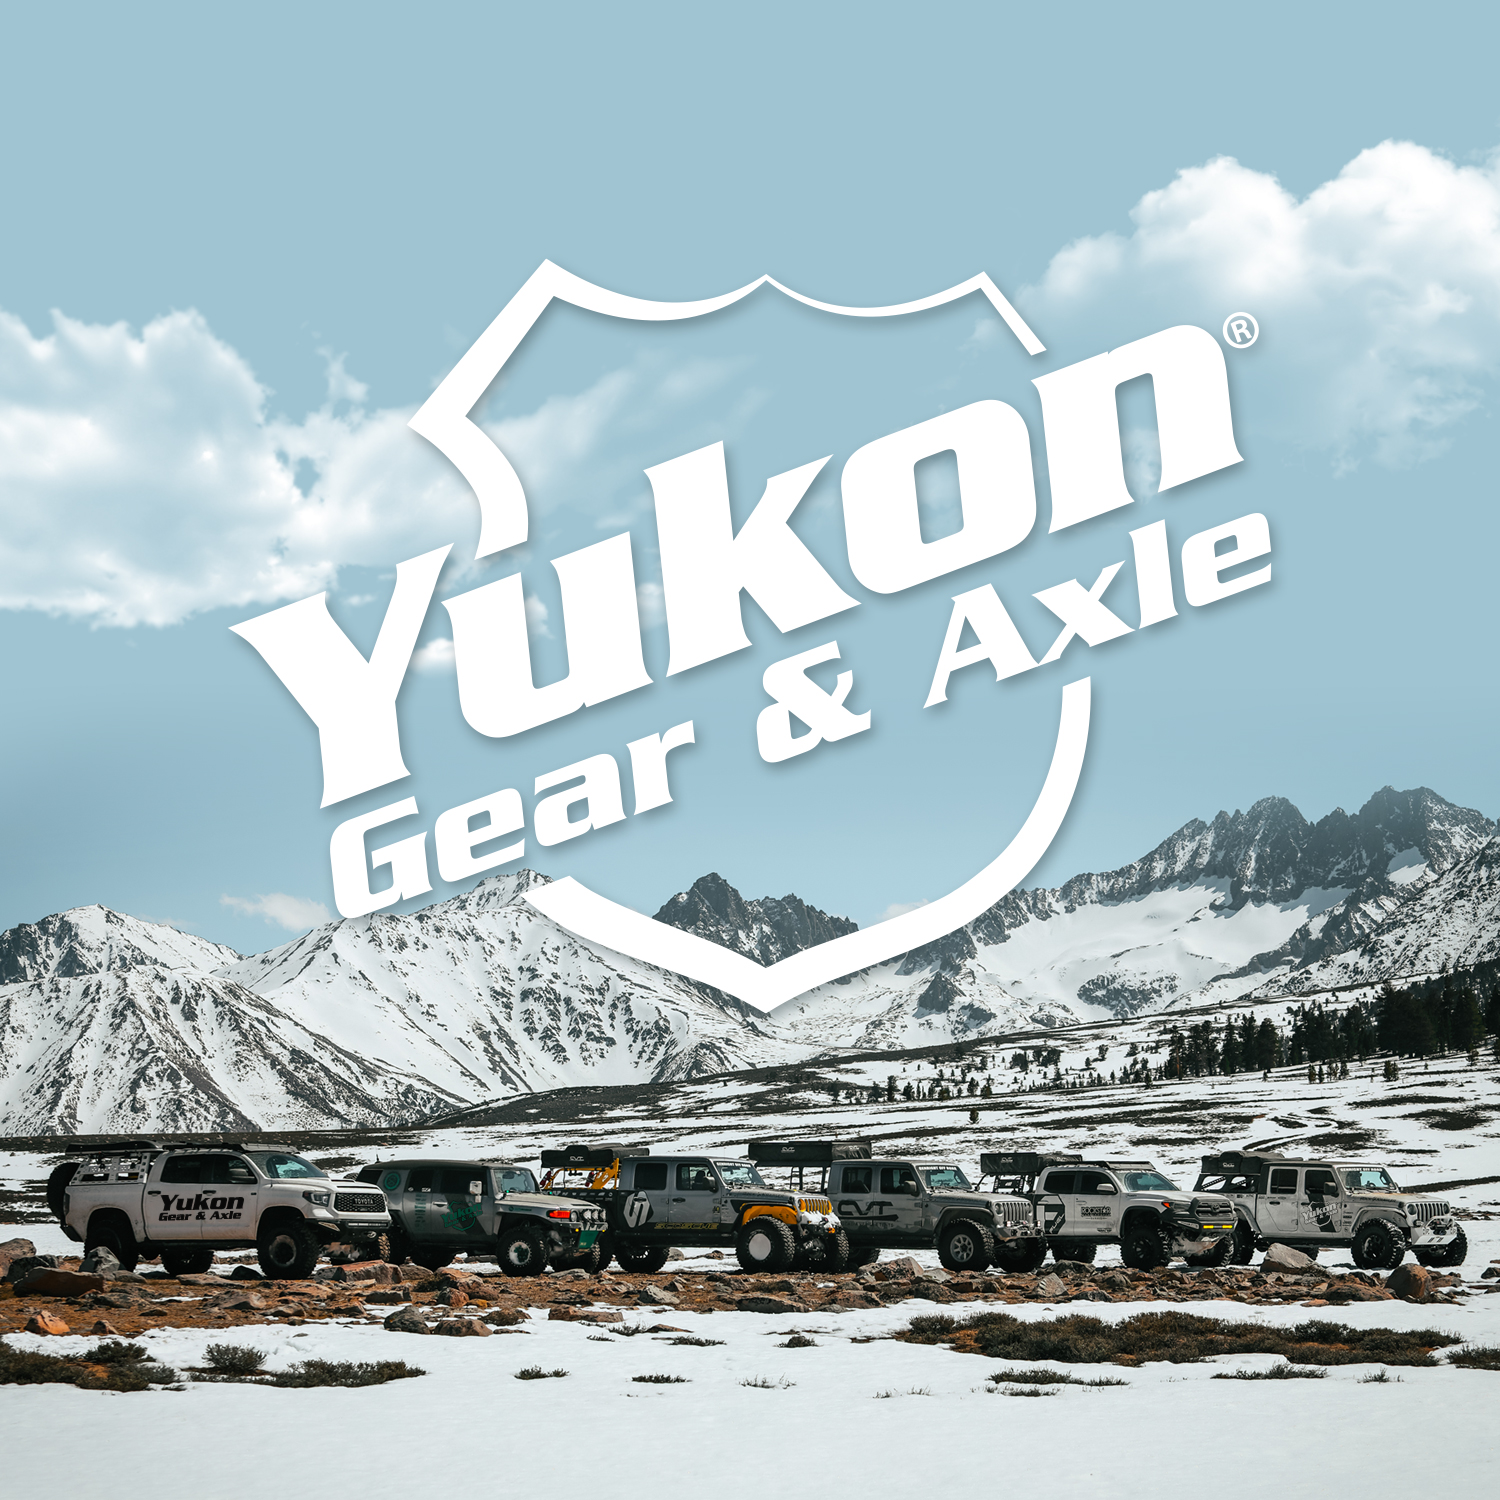 Yukon pinion install kit for Dana 80 differential (4.125" OD only). 